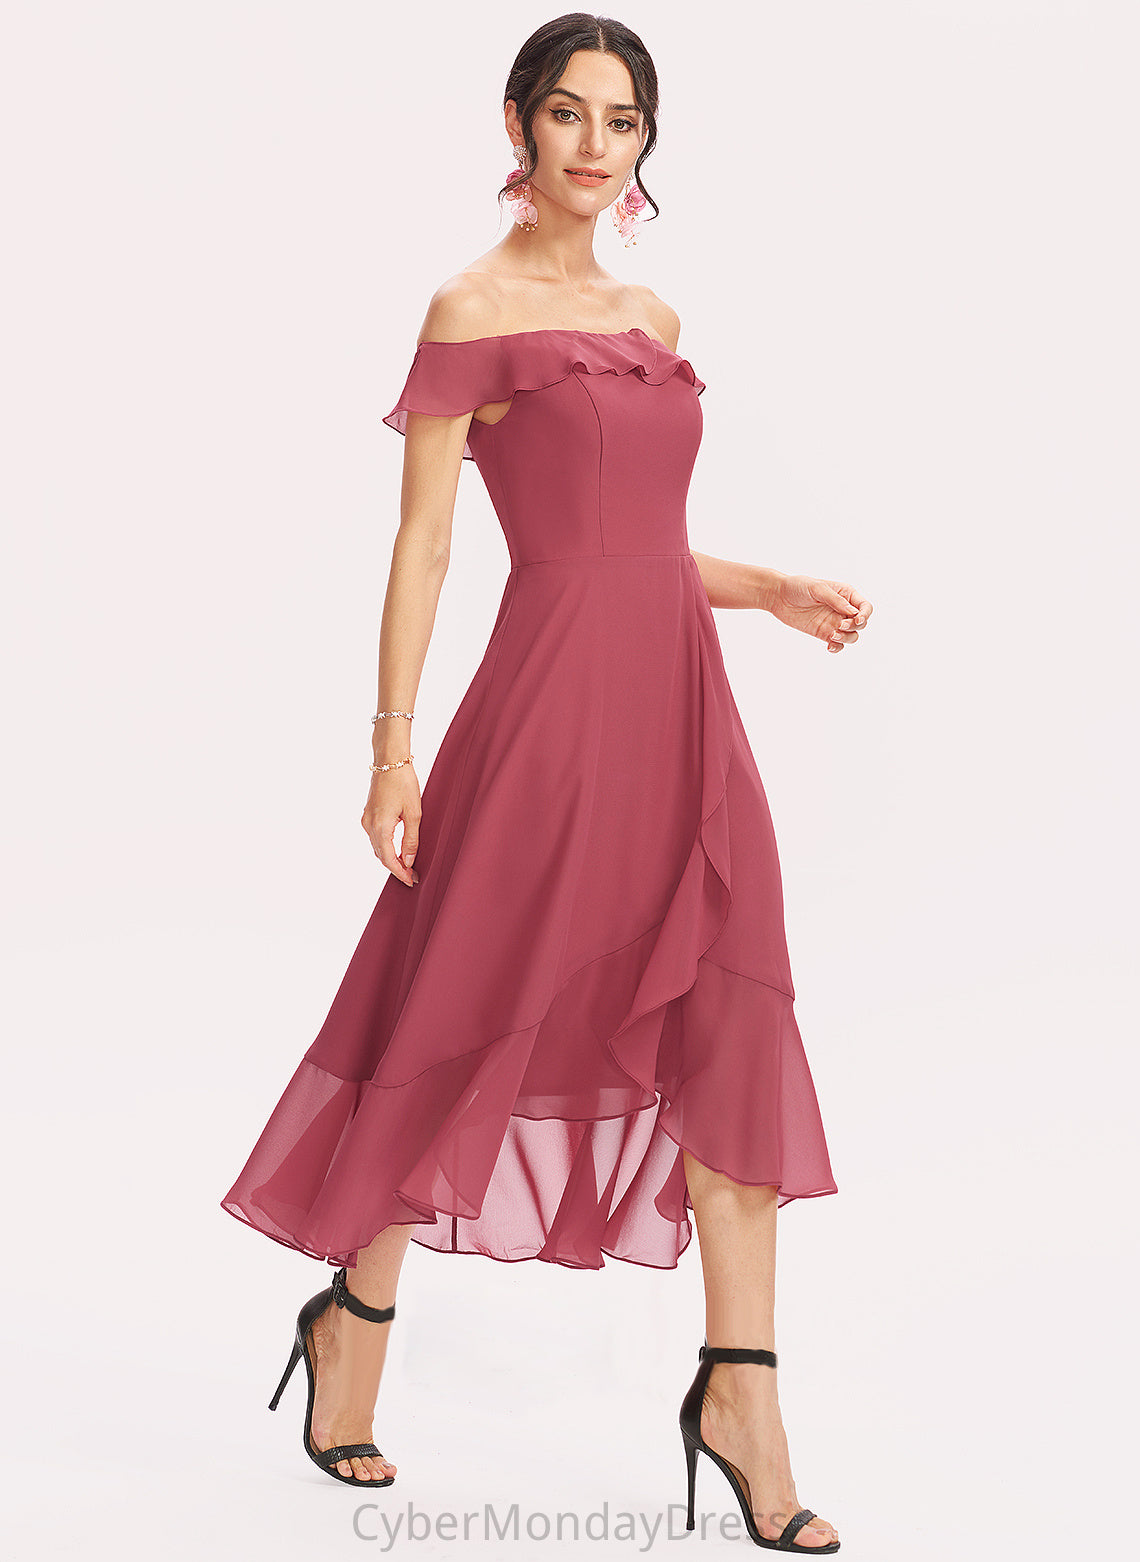 Chiffon Gia Cocktail Dresses Tea-Length Dress Cascading Ruffles A-Line Off-the-Shoulder With Cocktail